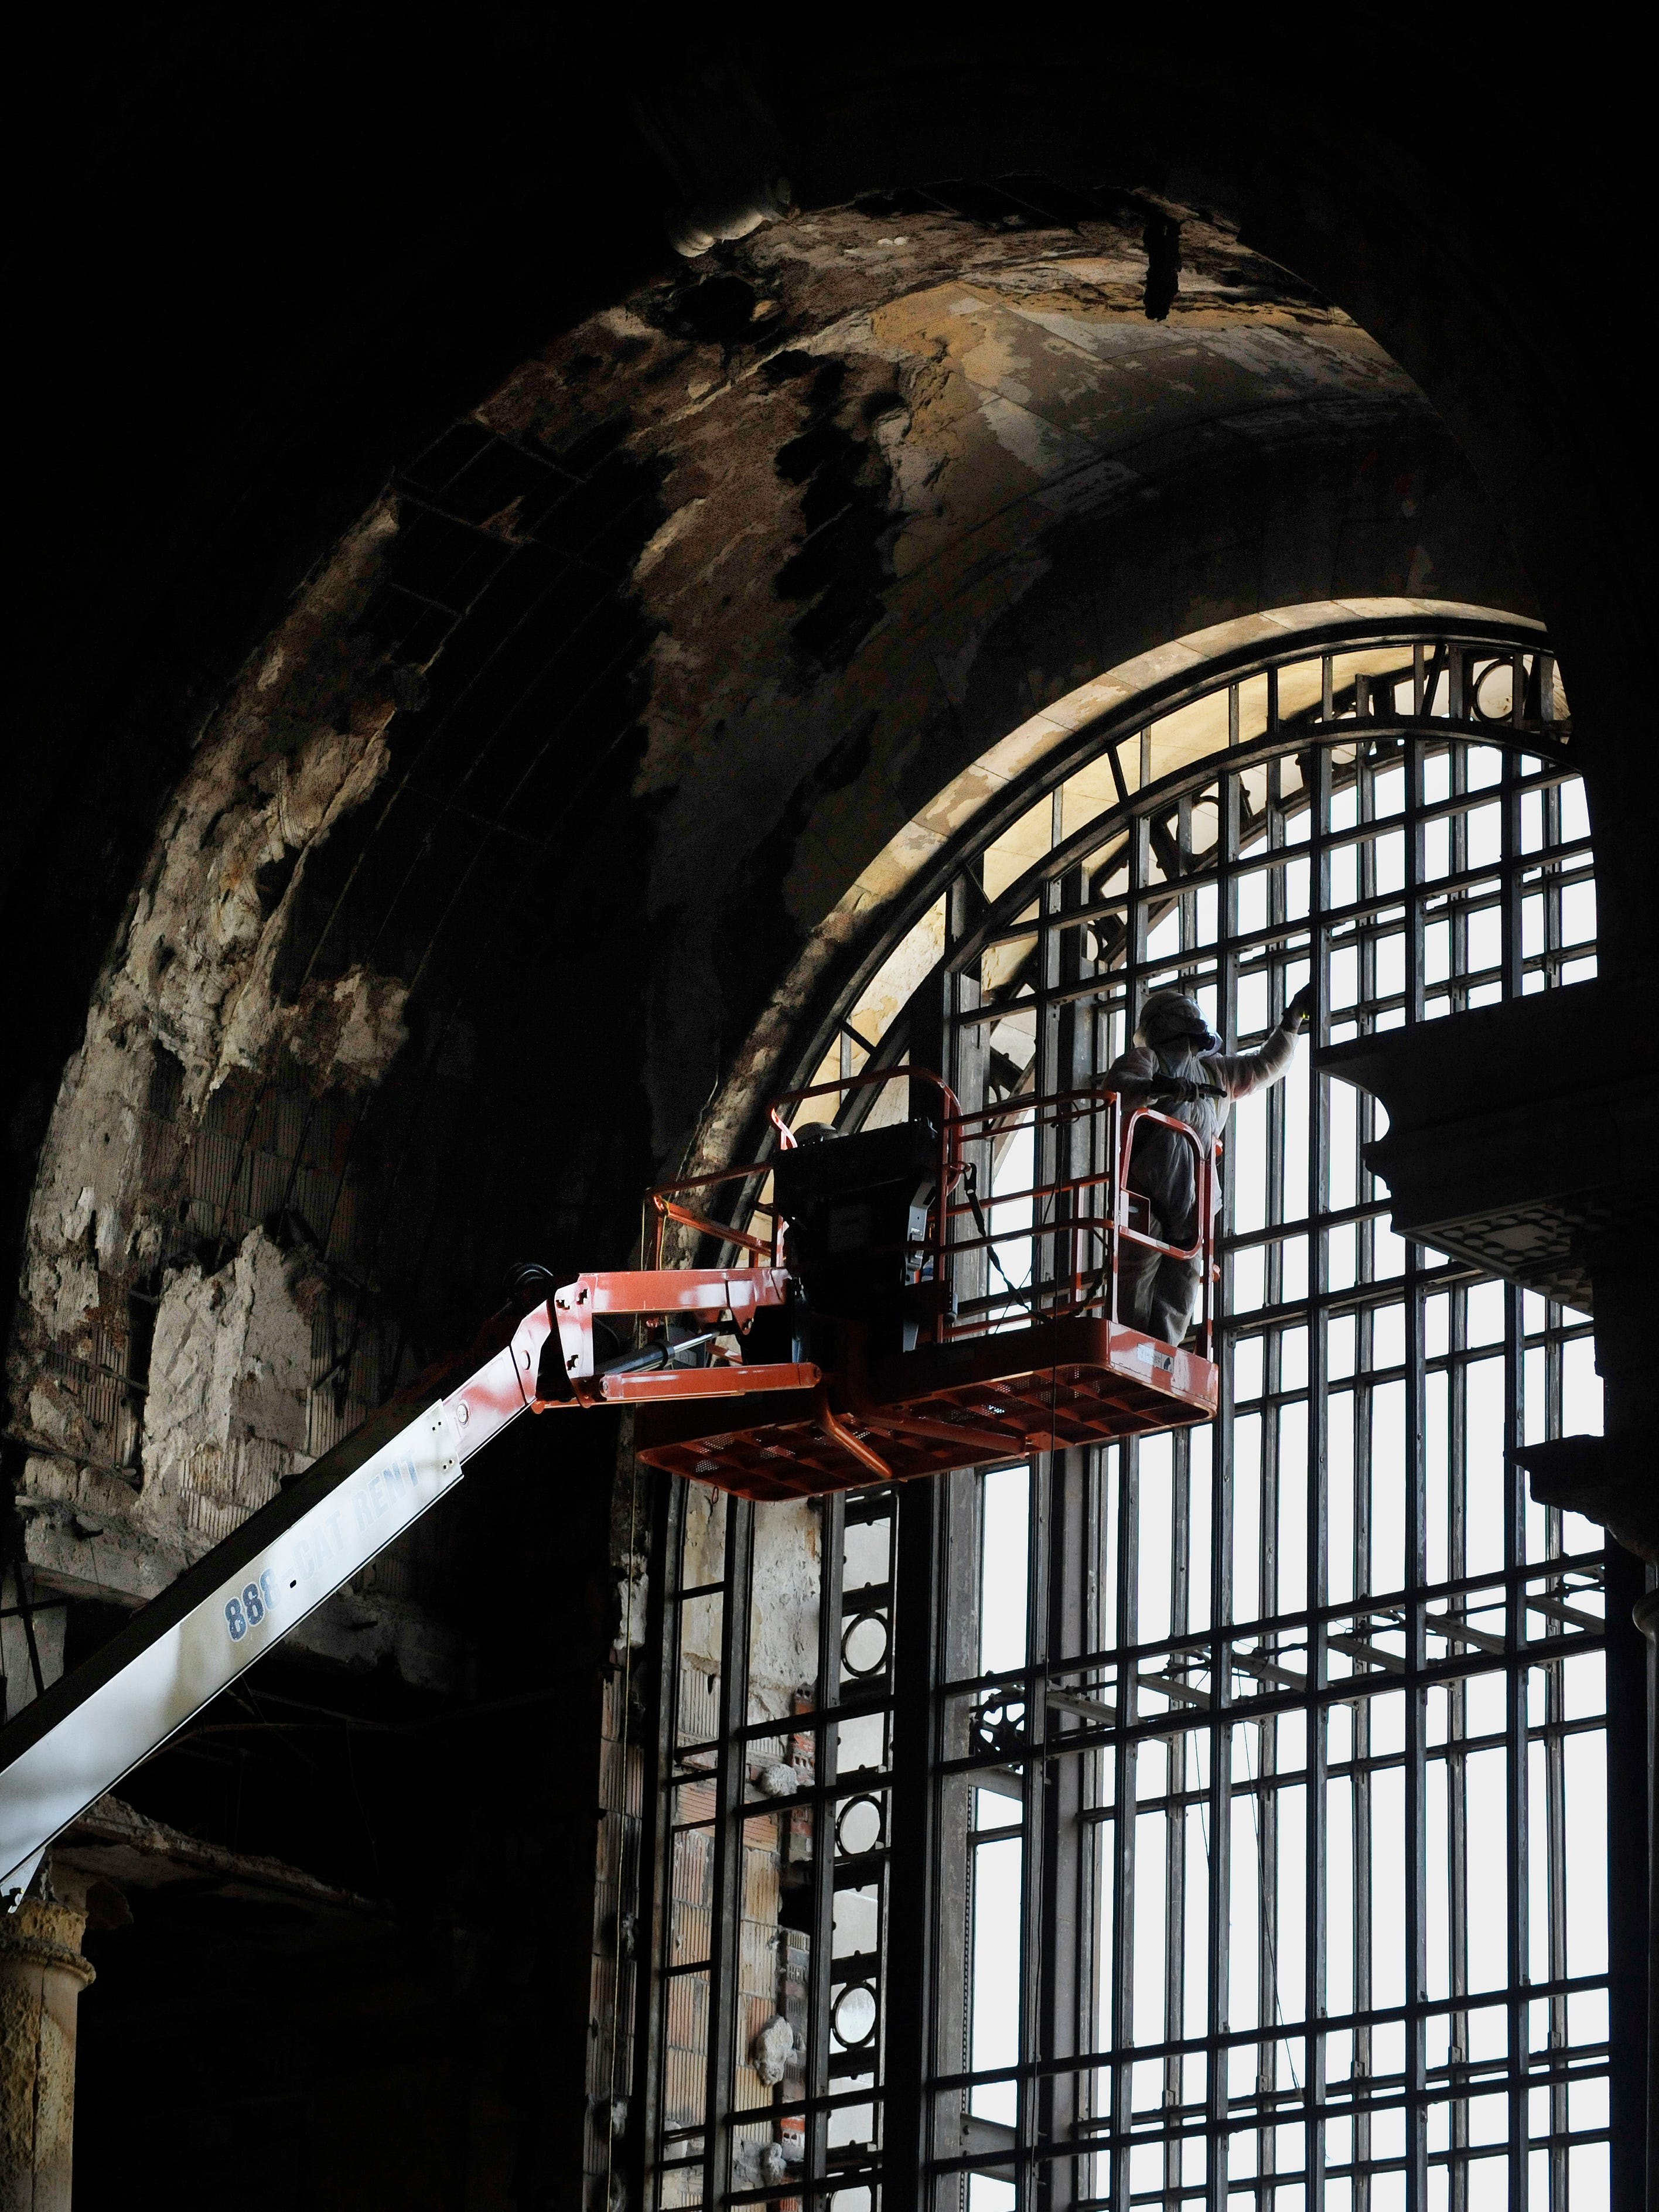 A worker prepares the metal framework for replacement windows inside the mezzanine of the train depot in 2011.